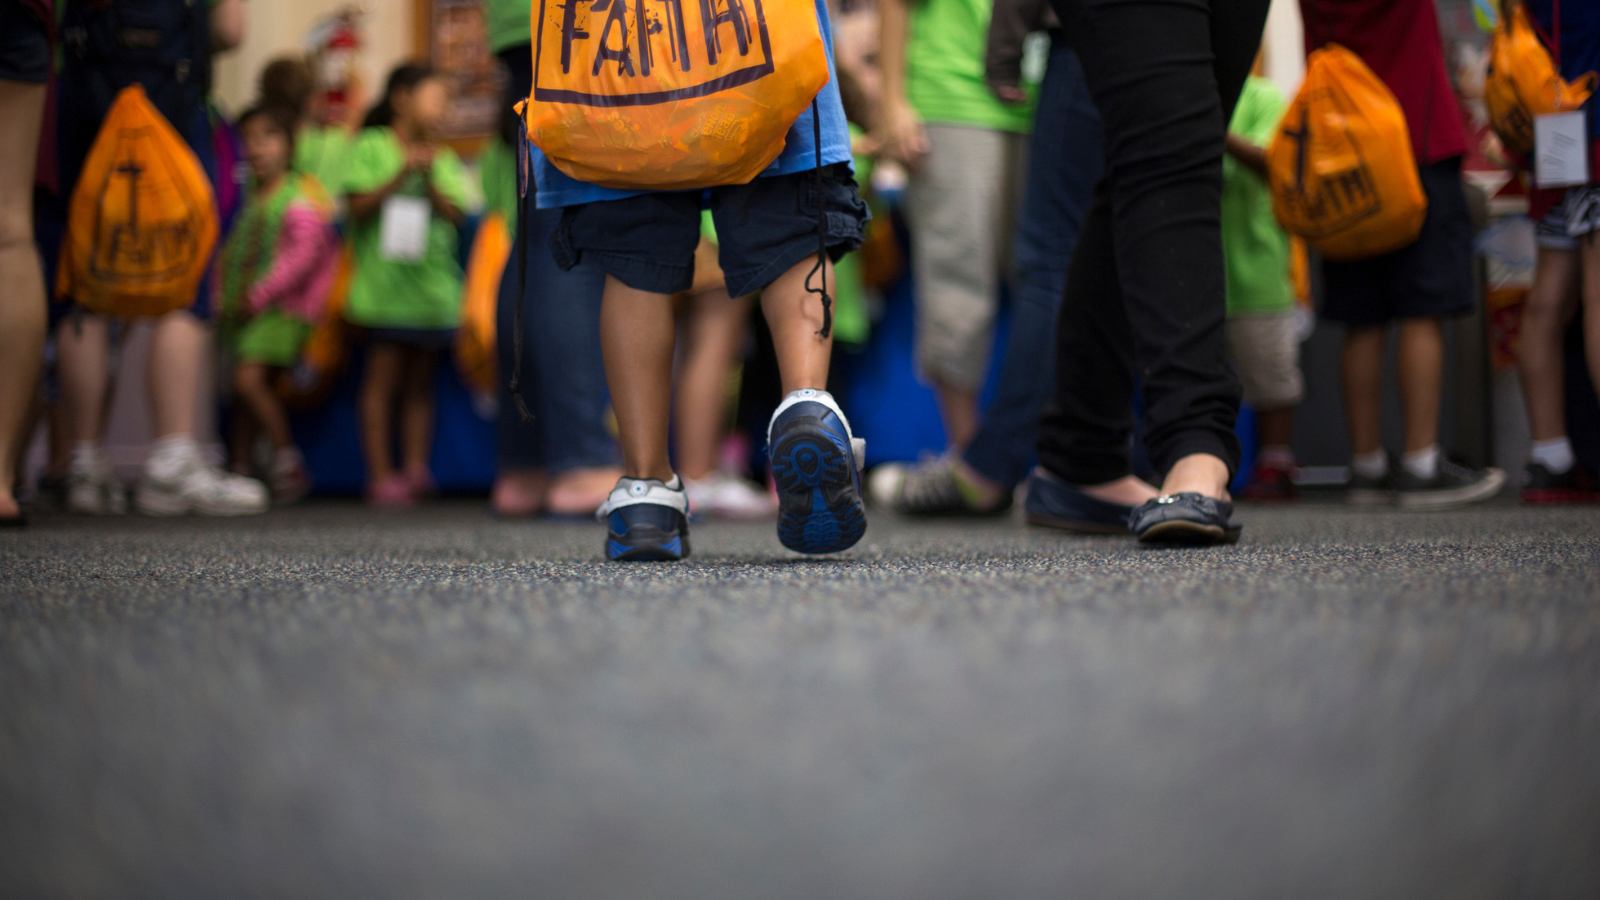 child carrying faith backpack in school crowd